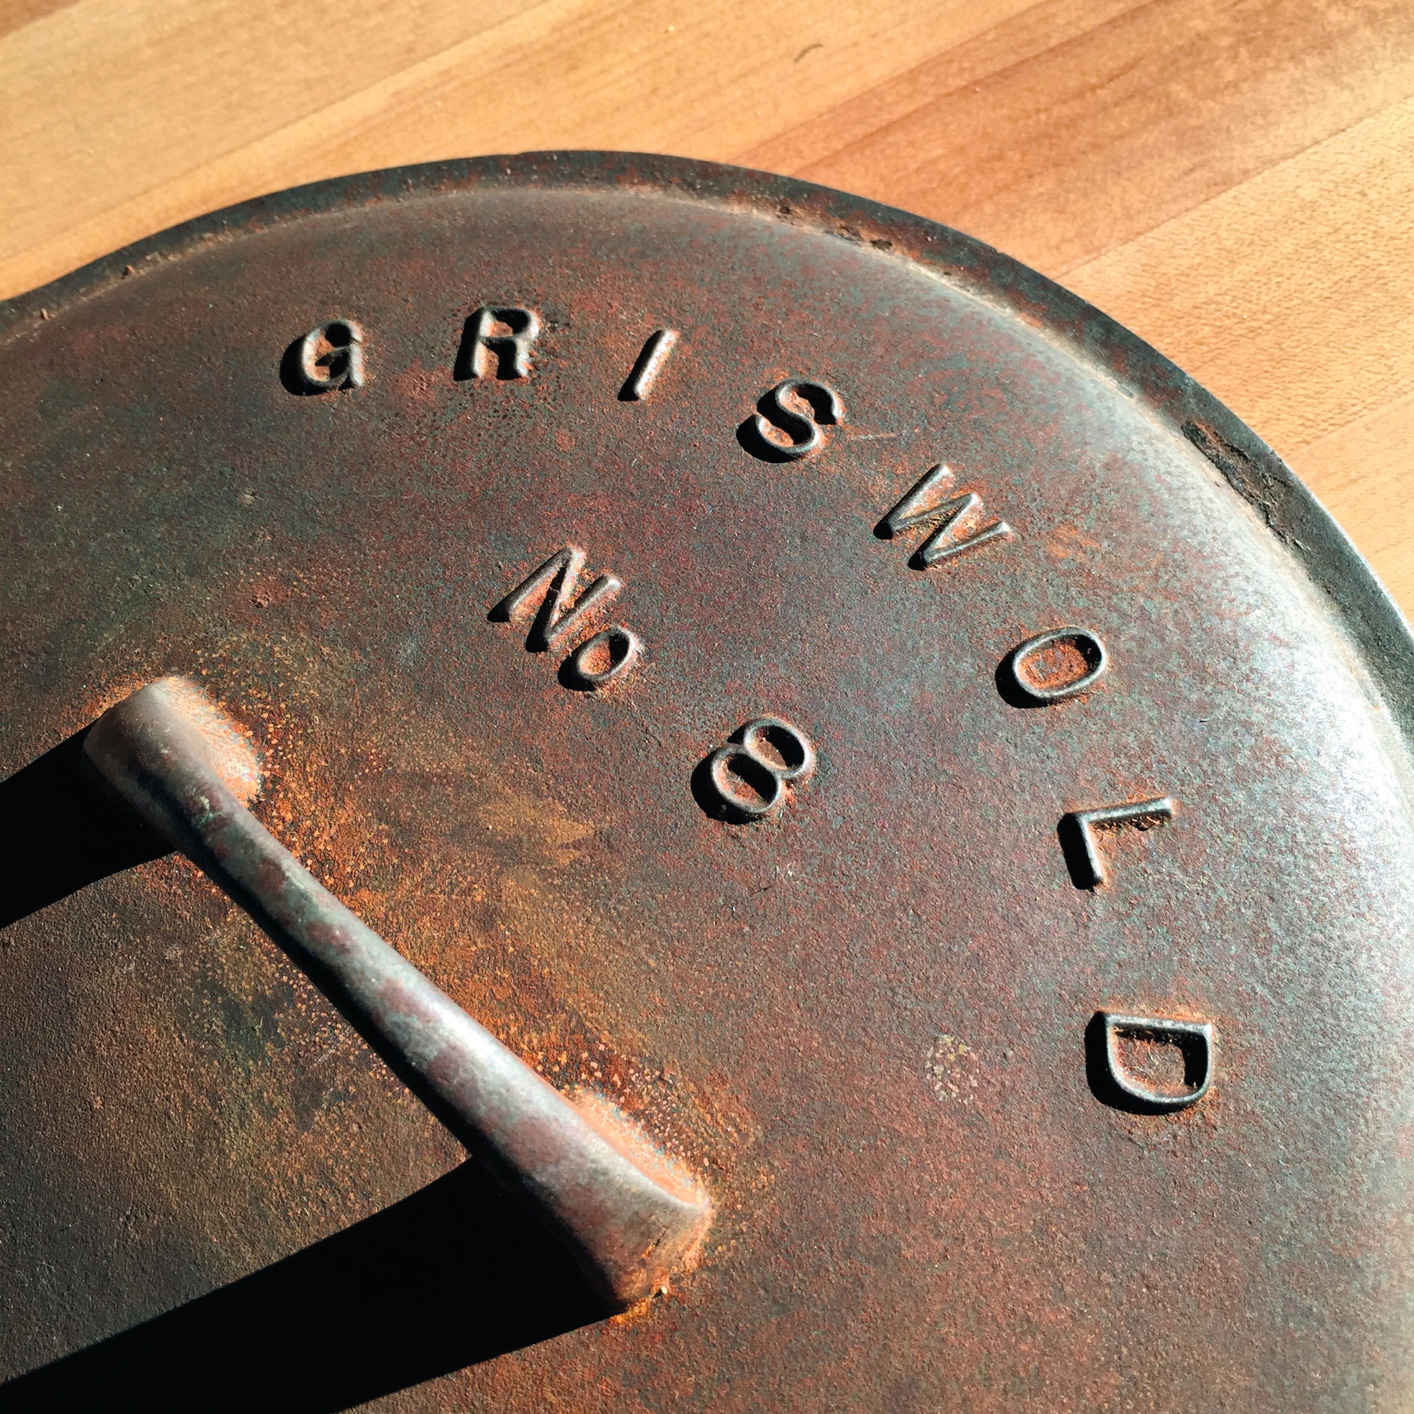 The Griswald Manufacturing Co. of Erie, PA, made cast-iron for nearly 100 years. If you find any buy it and send to me!